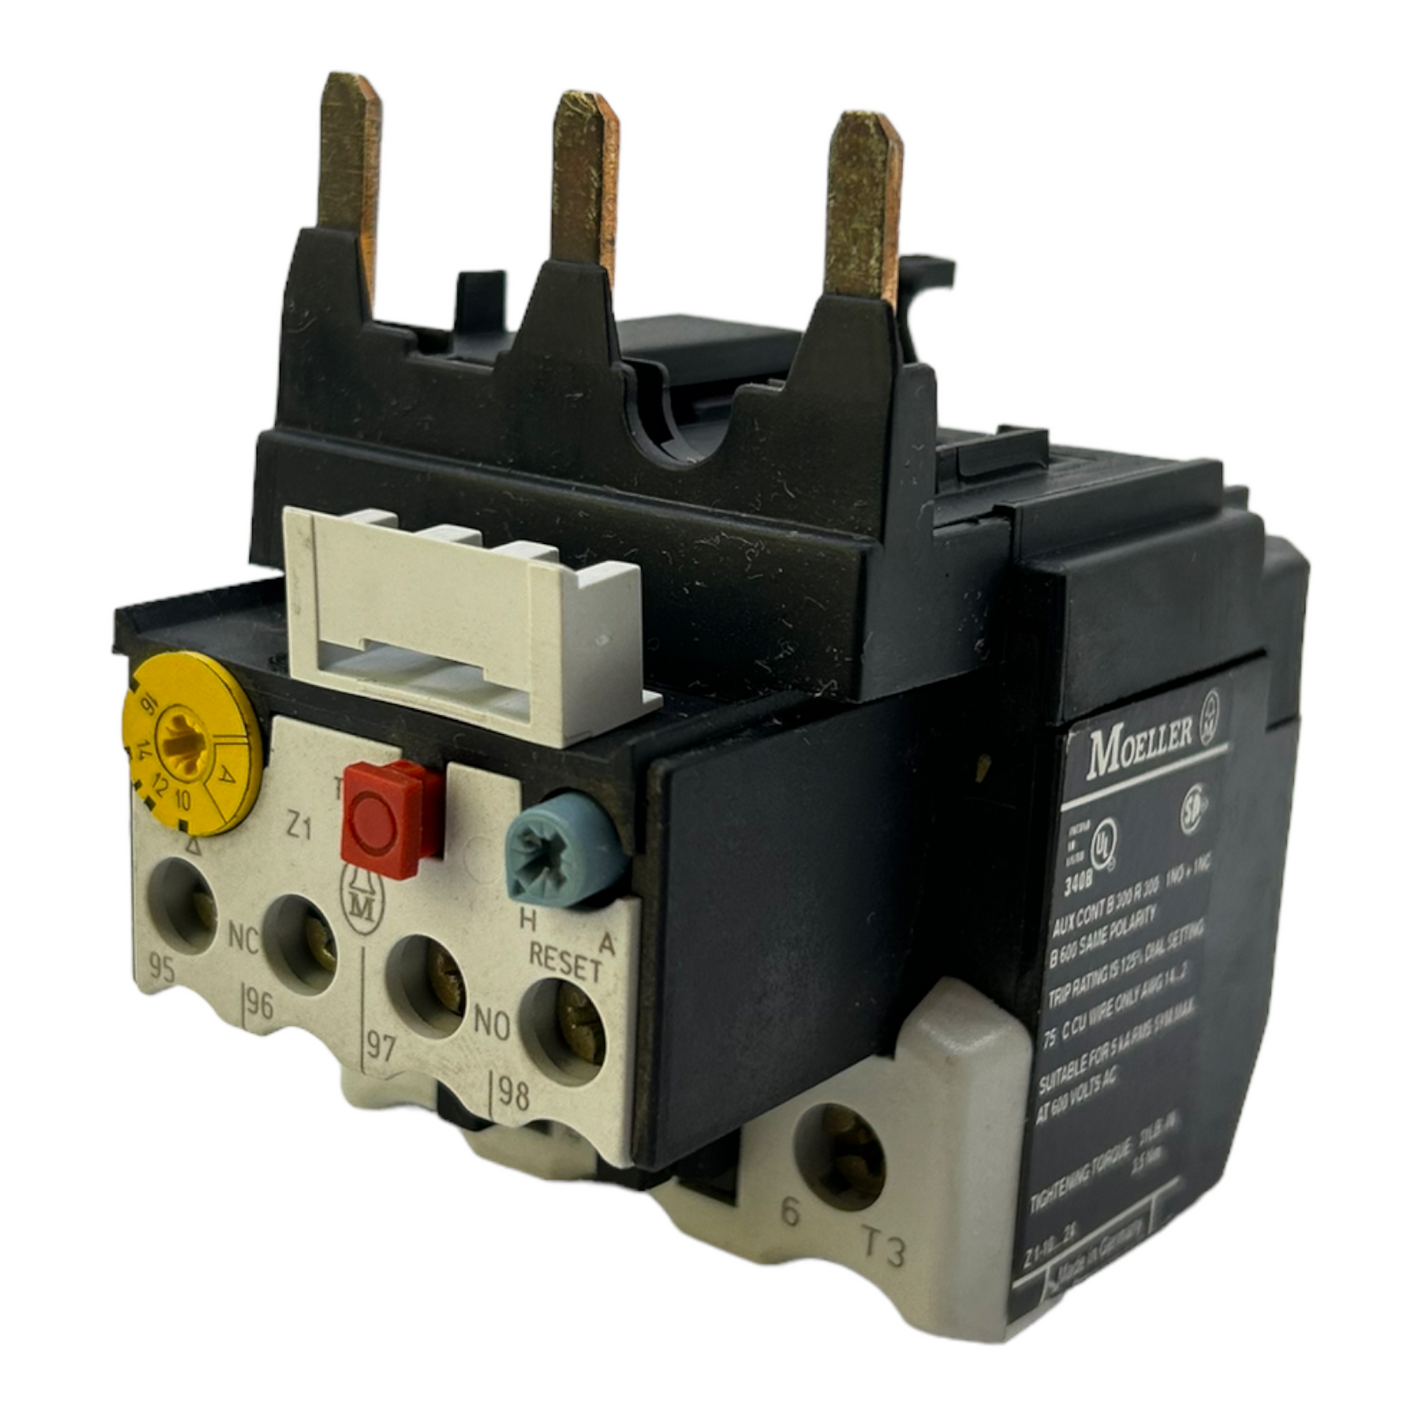 Moeller Z1-16 overload relay for industrial use 10…16A overload relay